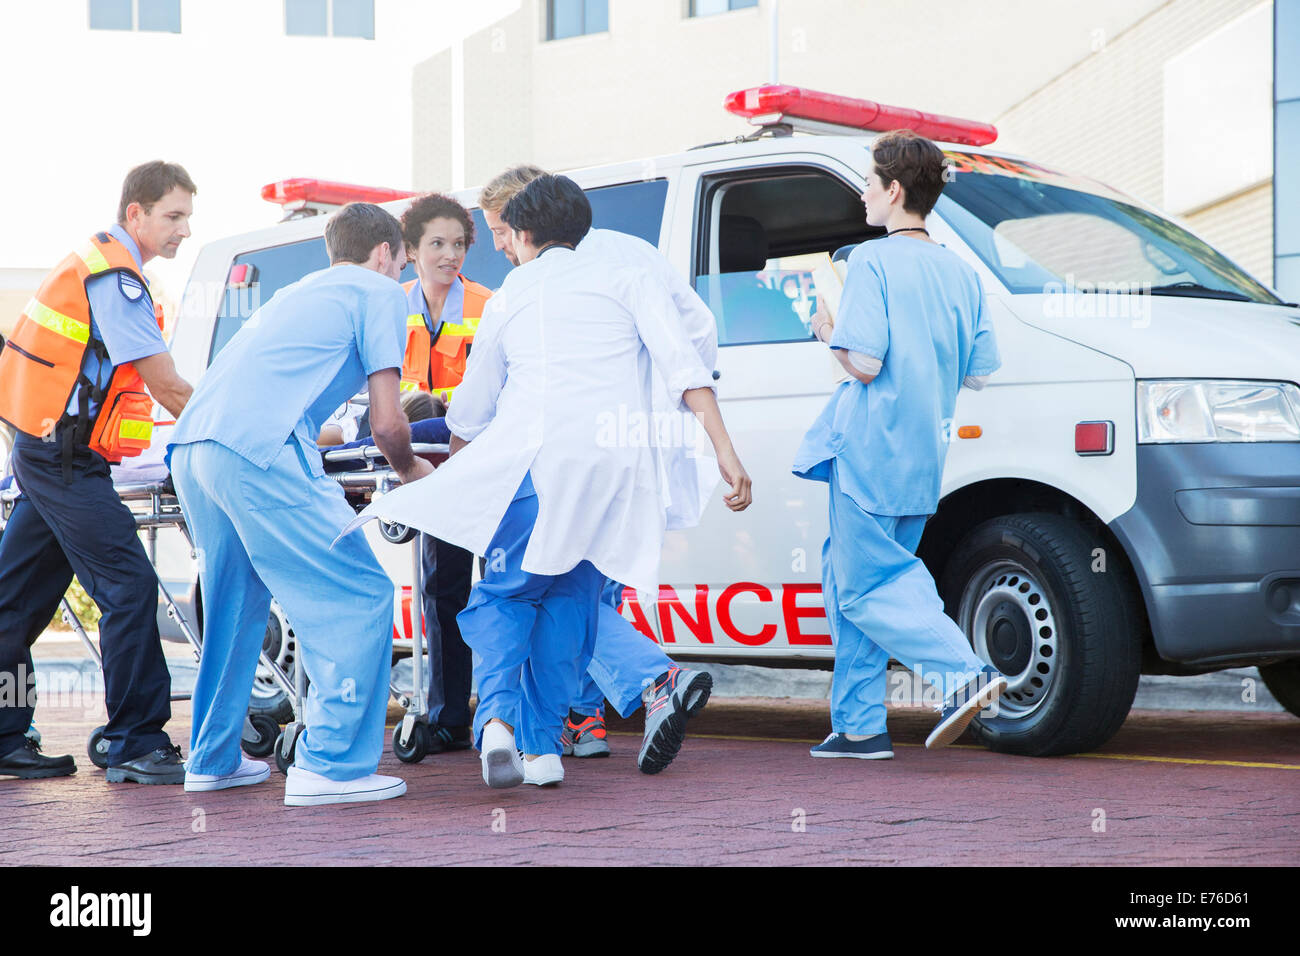 Doctors, nurses, and paramedic examining patient on stretcher Stock Photo